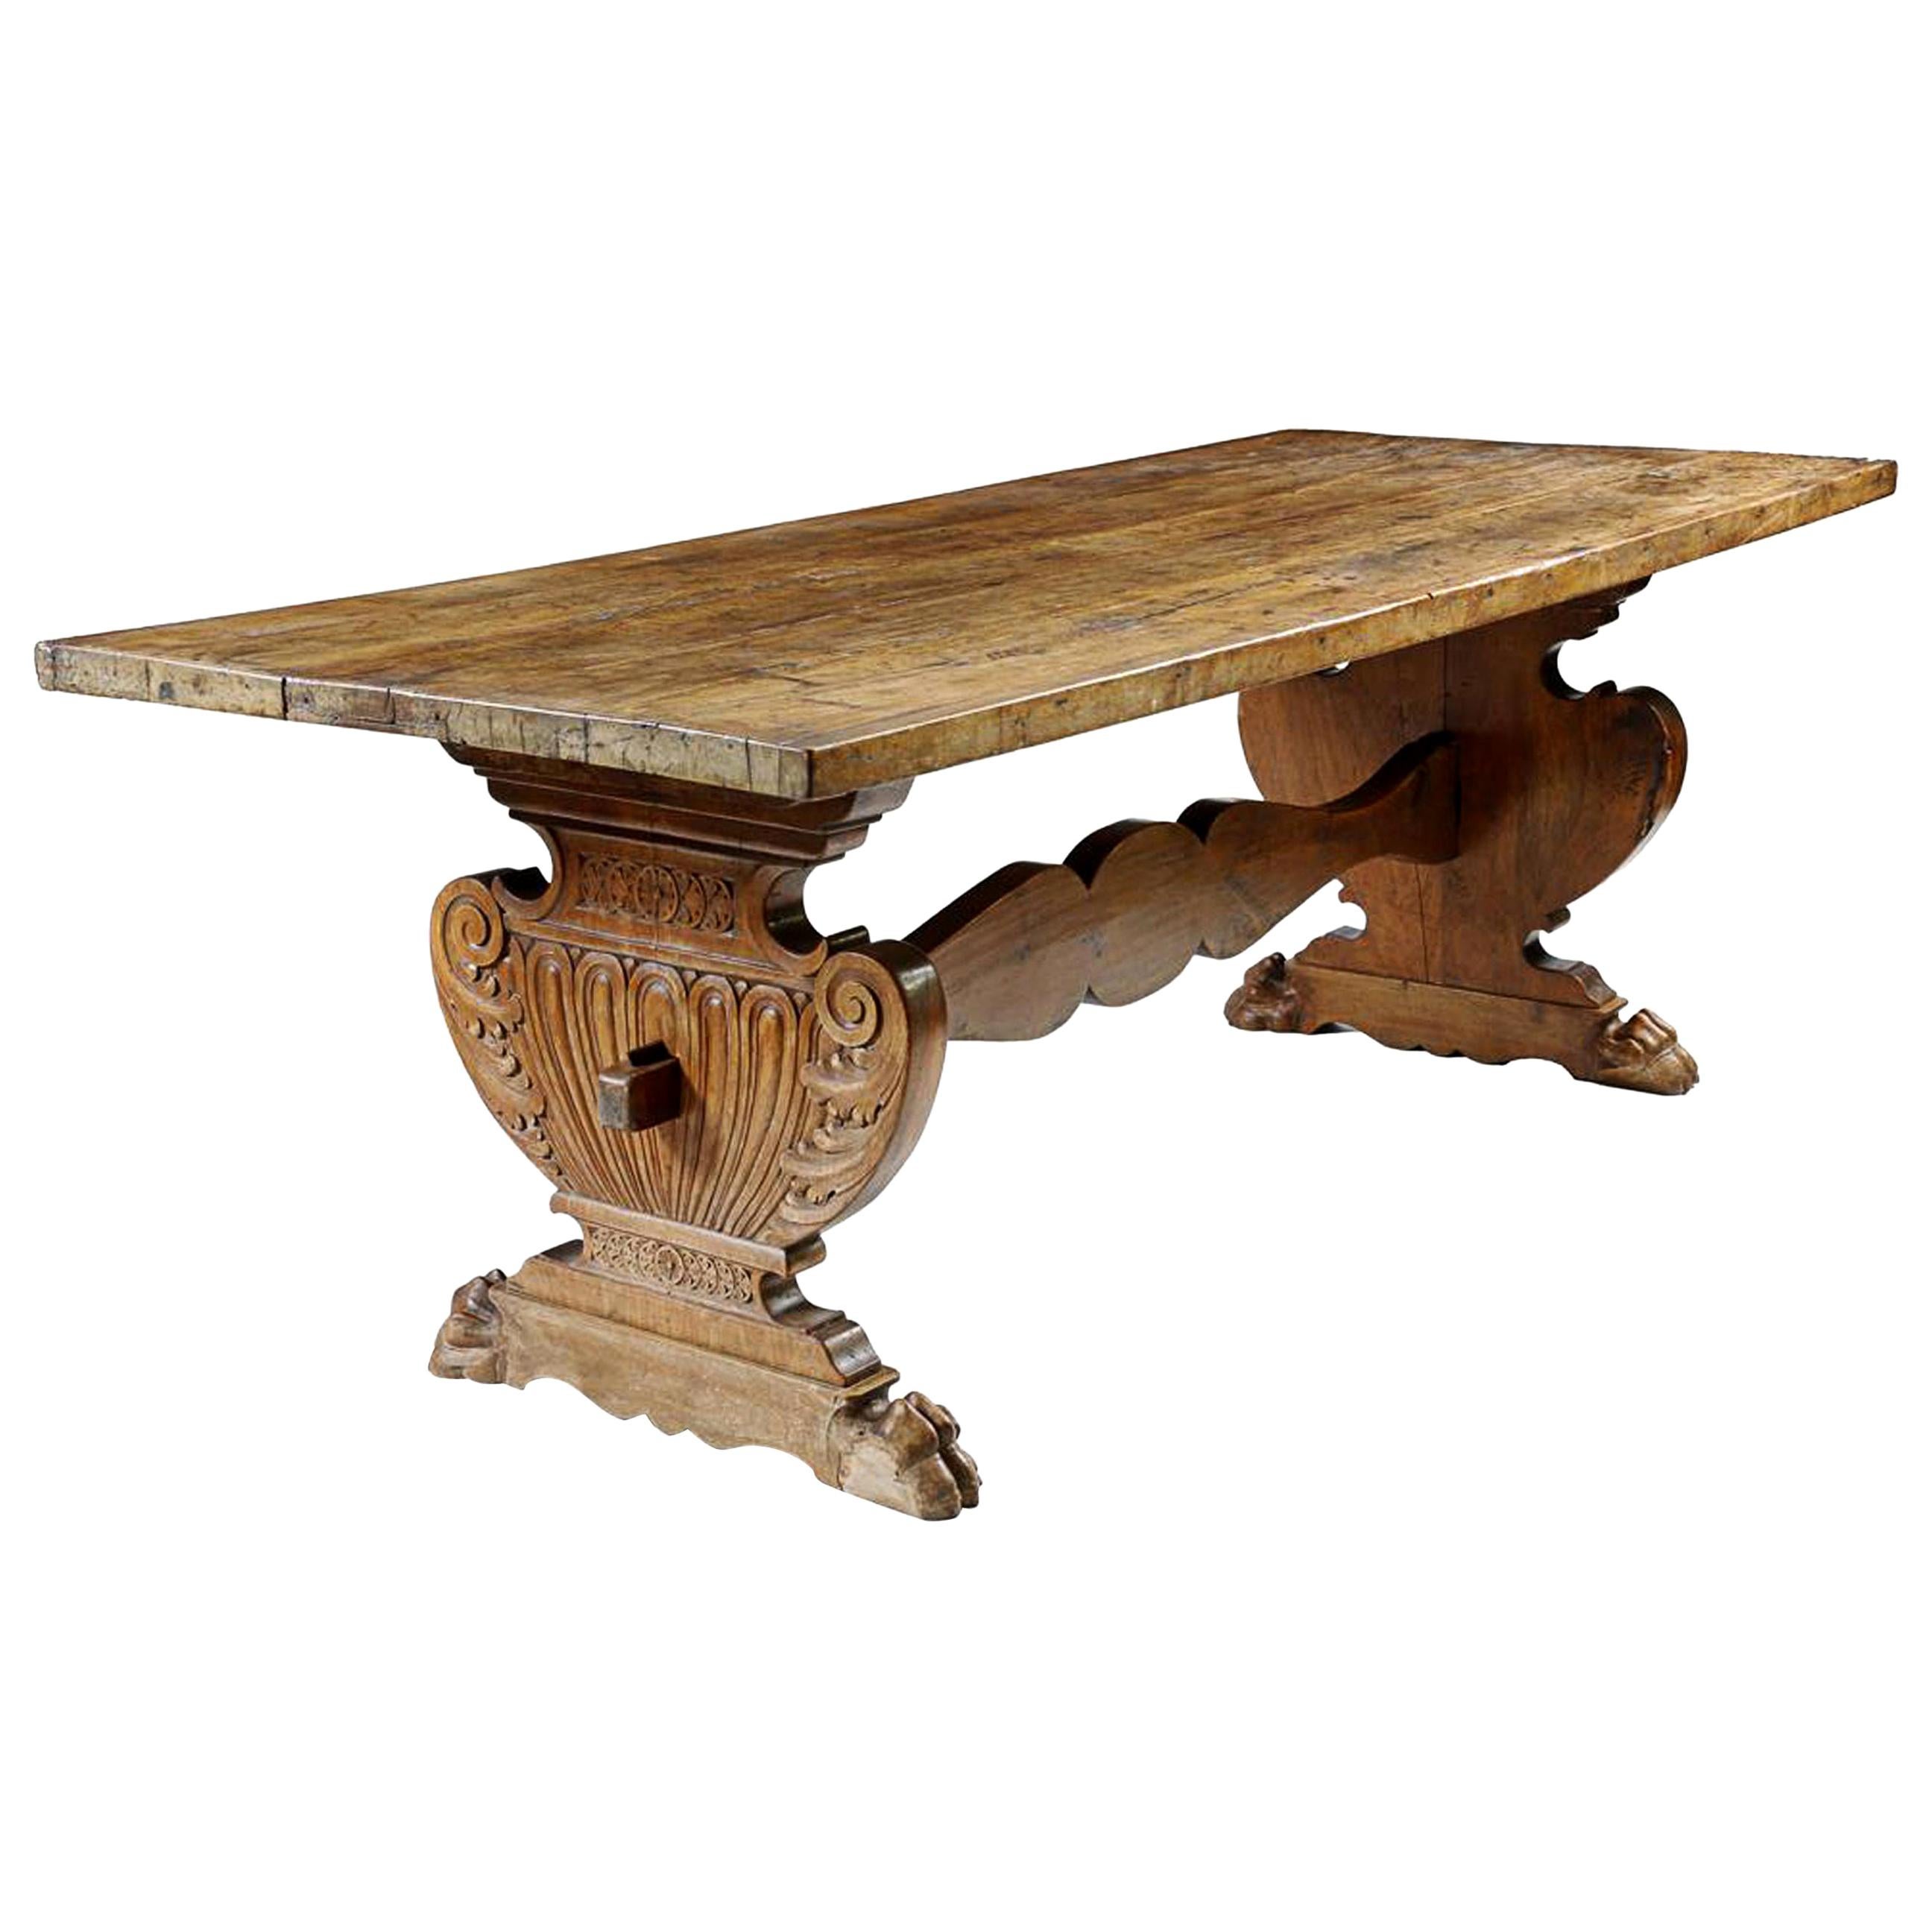 Antique Italian, Tuscan Refectory Table, Solid Walnut